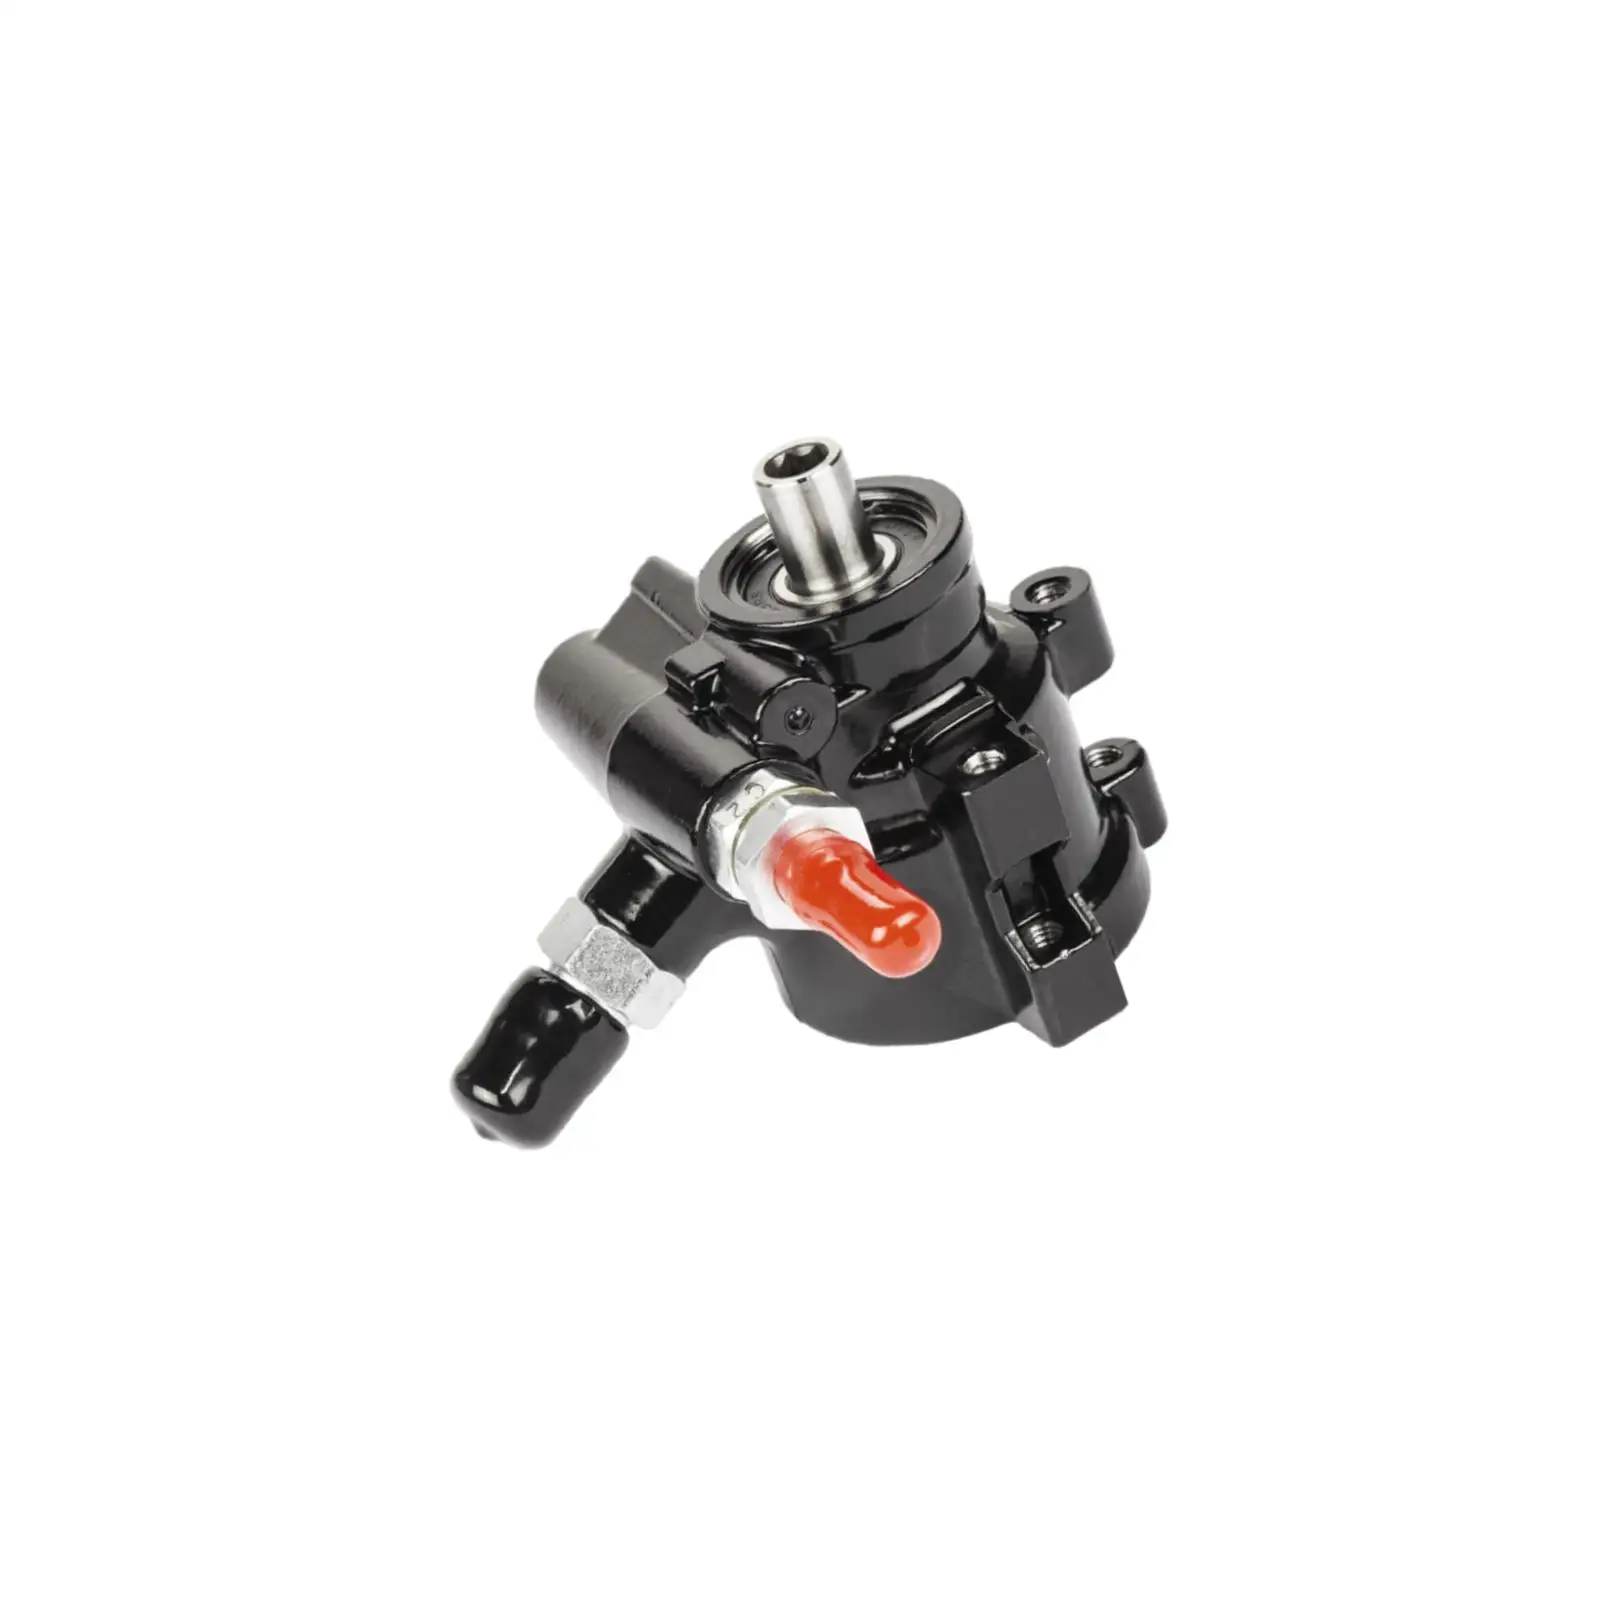 Power Steering Pump 172.1009 Car Accessories for Saginaw TC Type 2 Repair Part Sturdy Professional Easy to Install